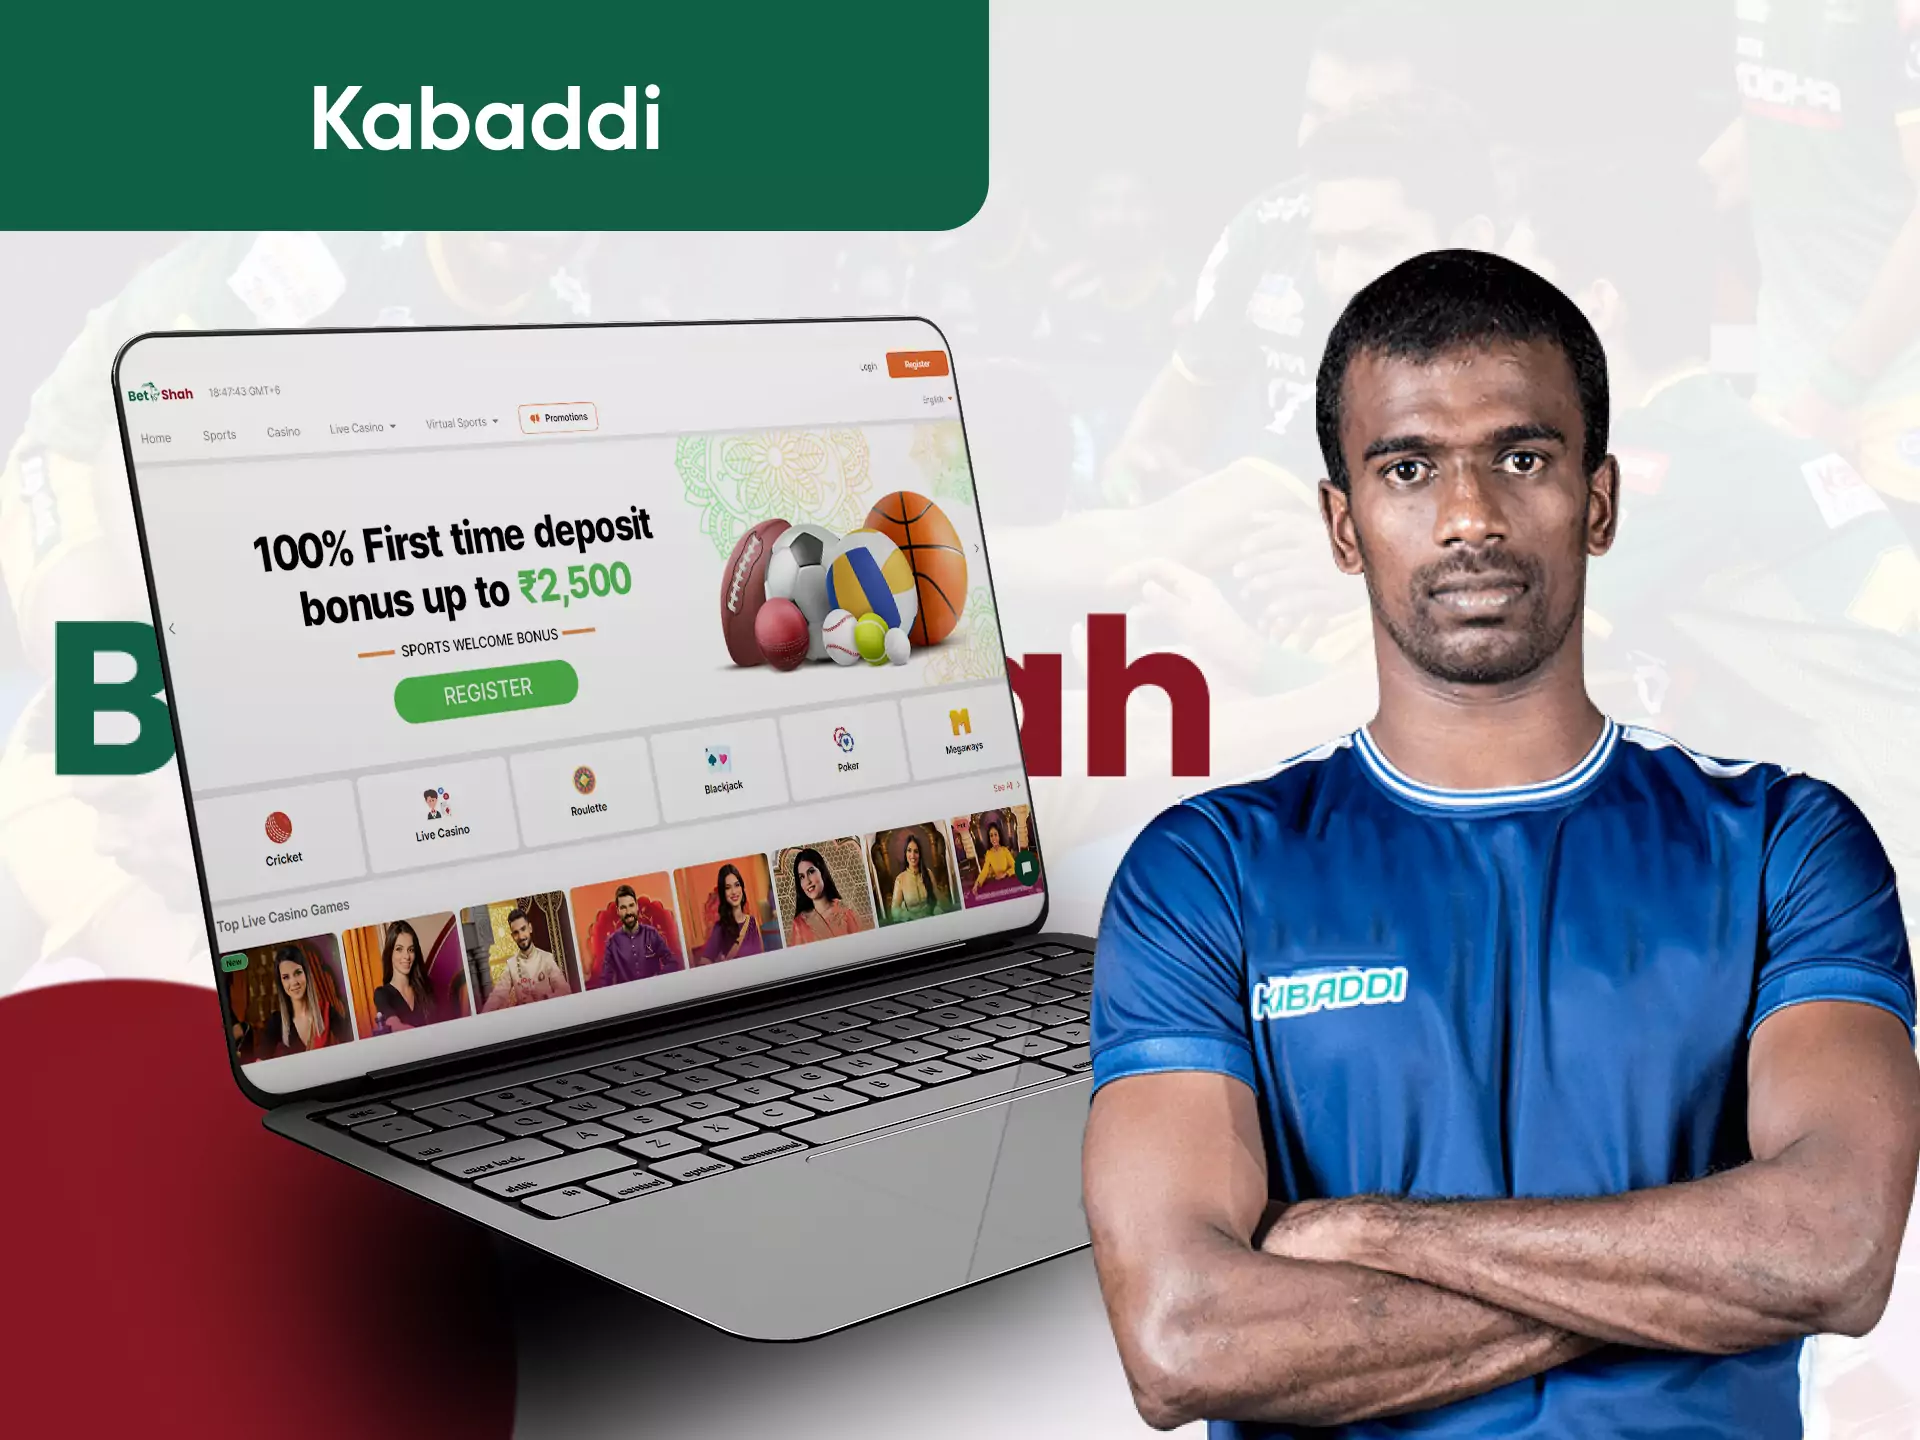 On the website of Betshah, you can place bets on kabaddi championships.